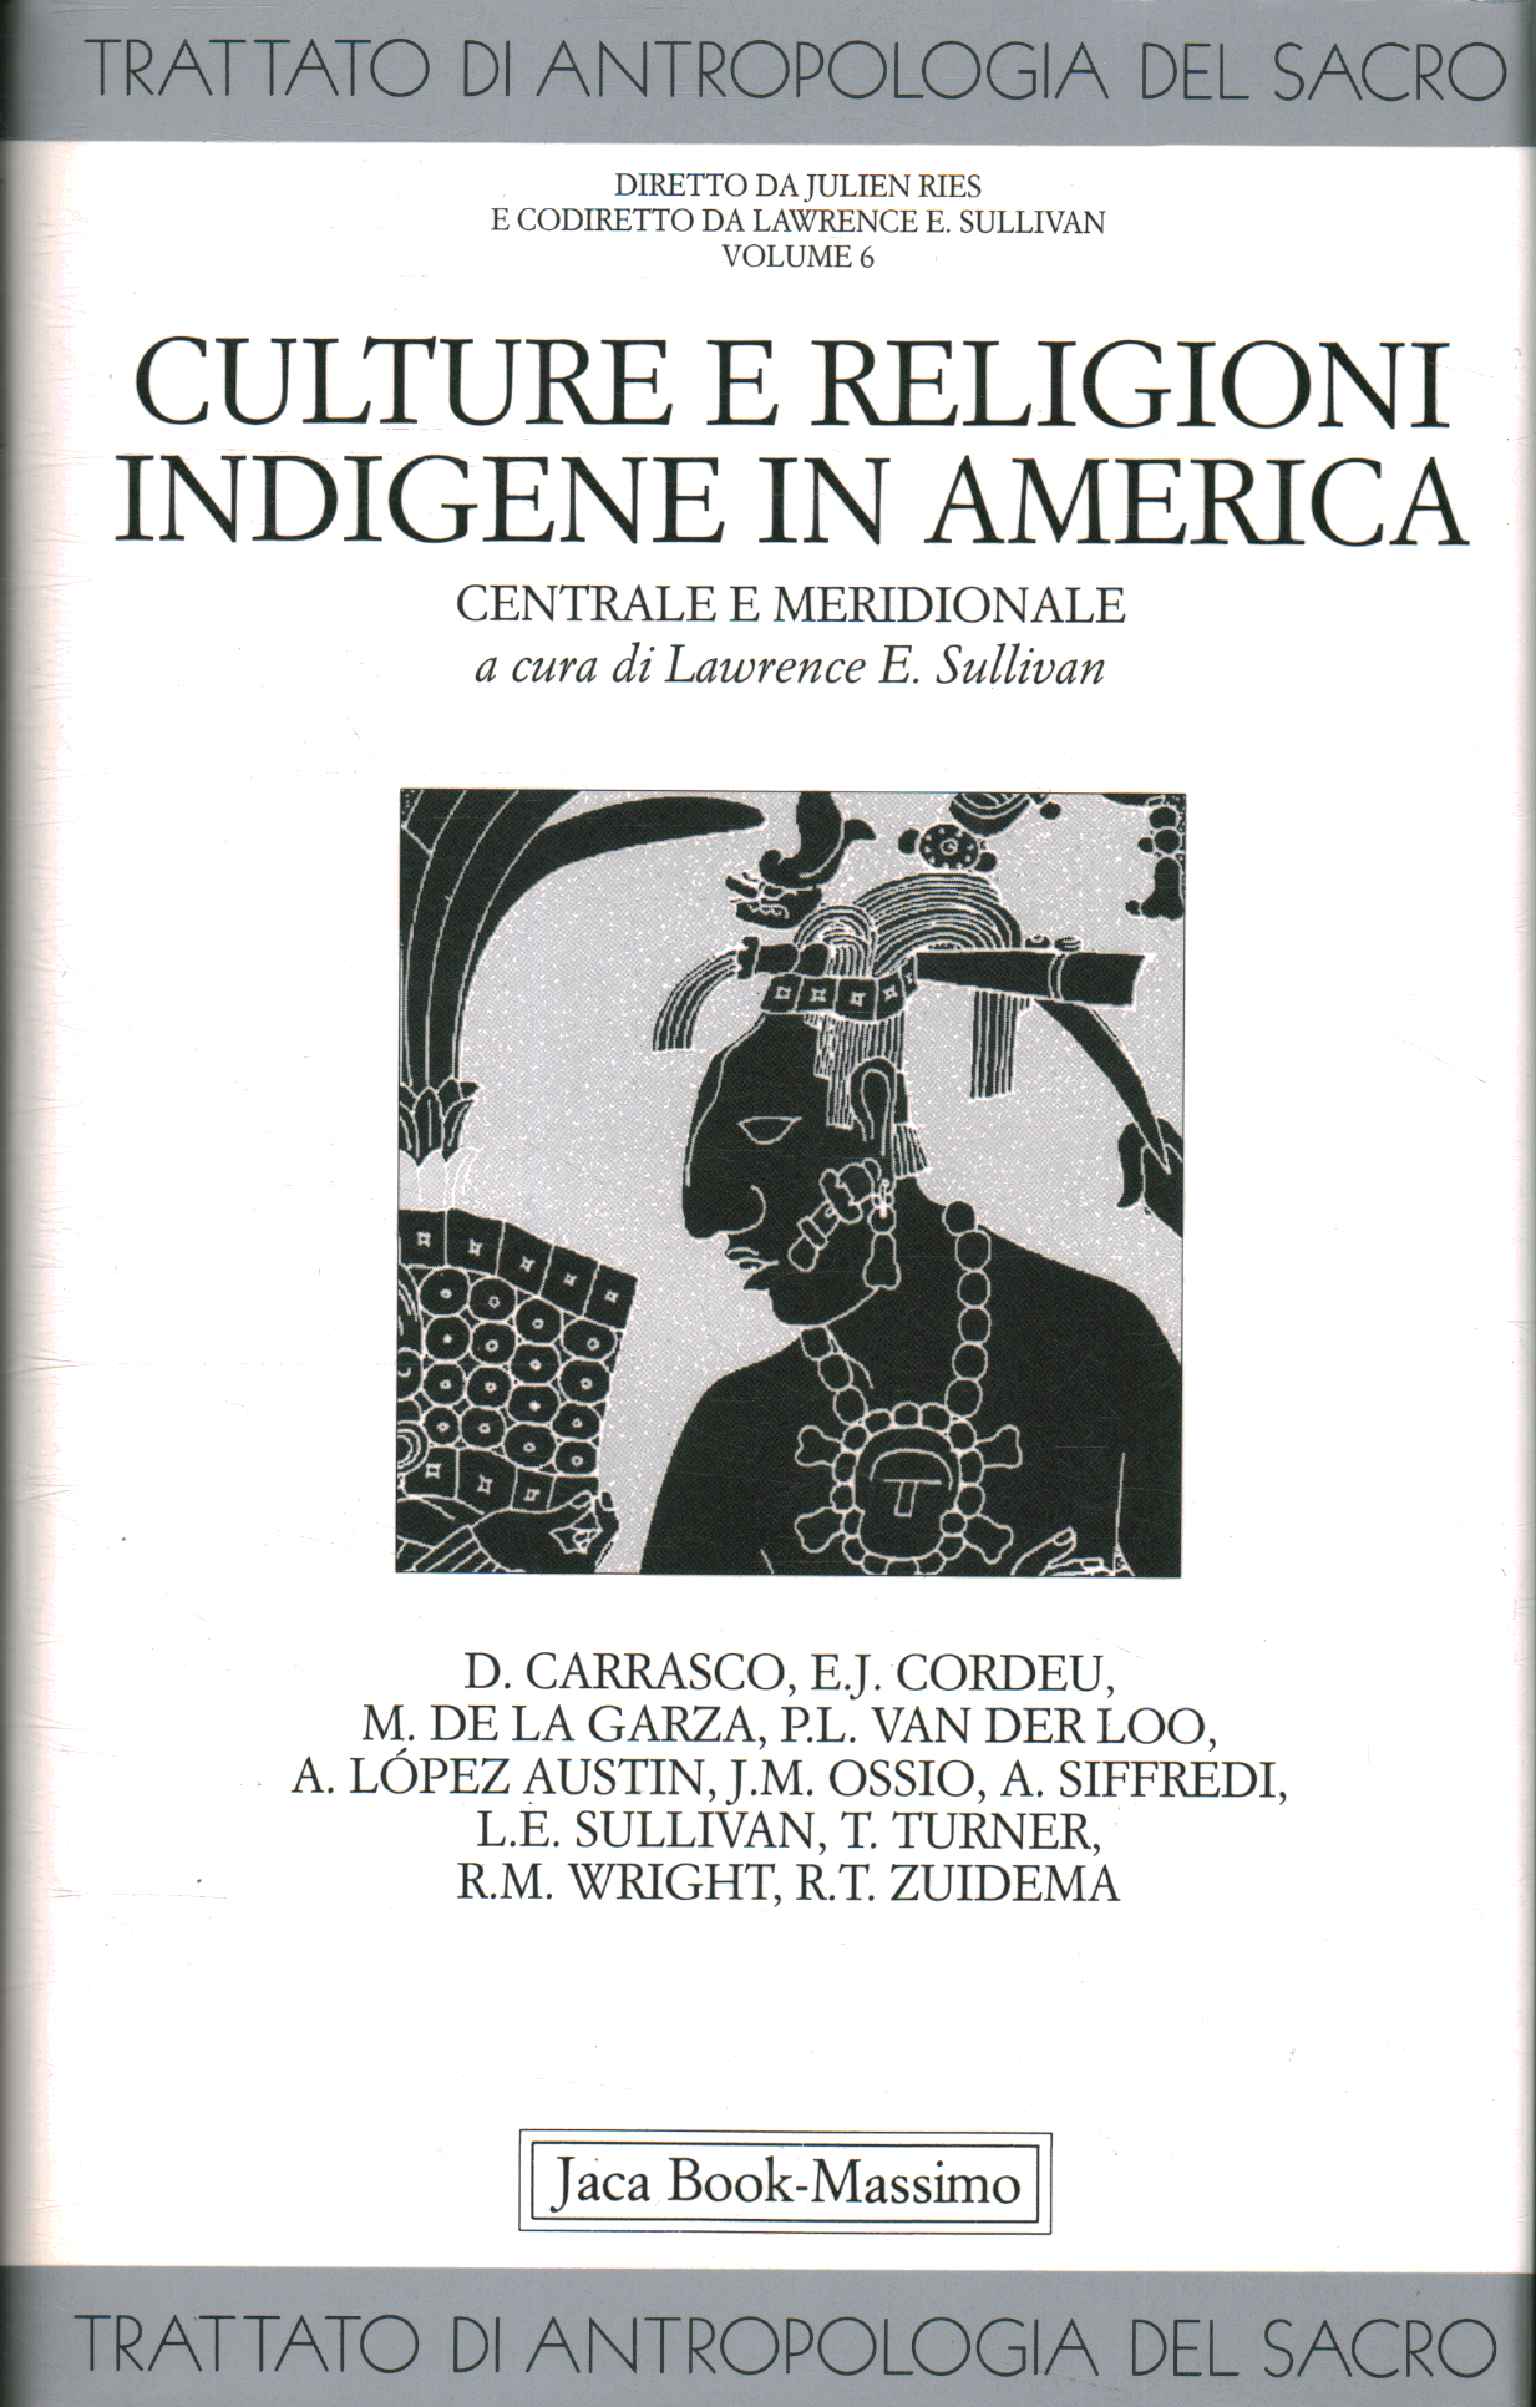 Indigenous cultures and religions in America